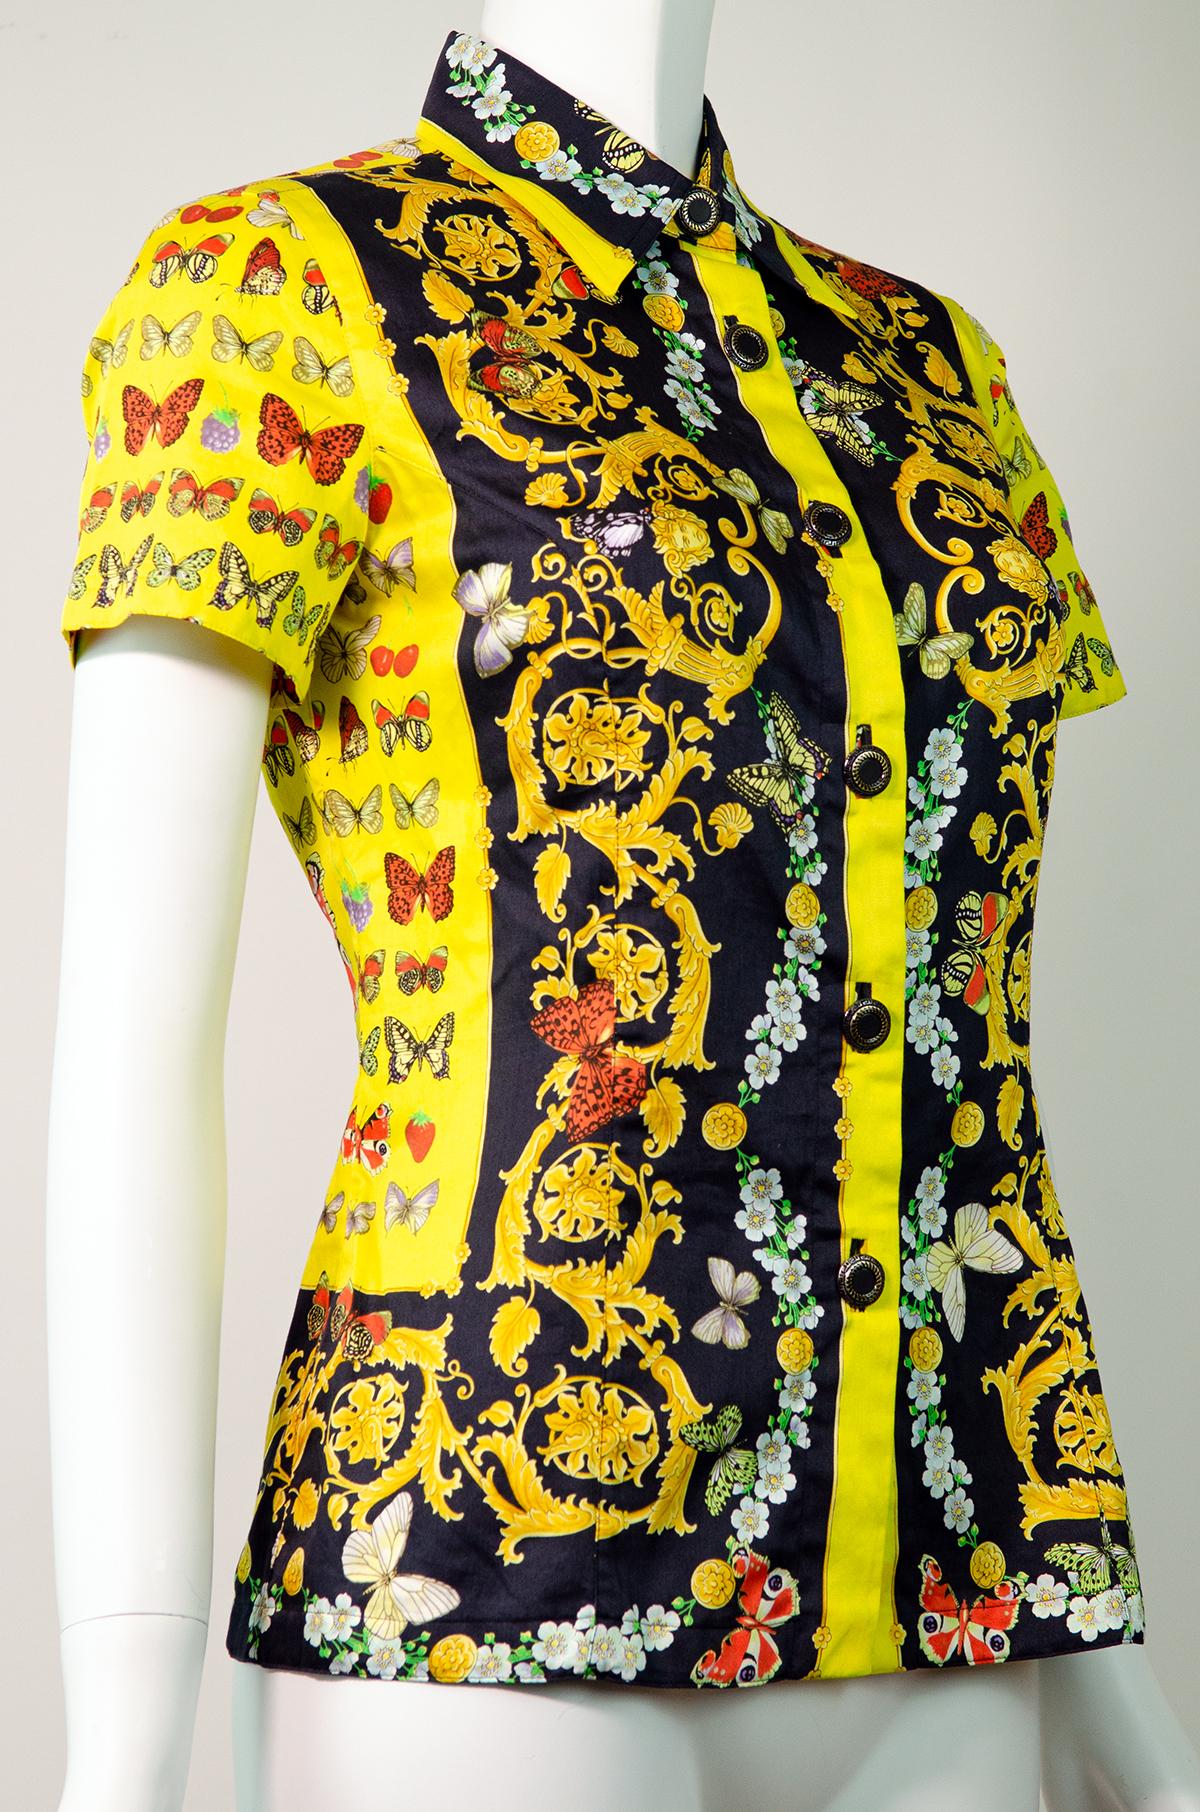 VERSACE S/S 1995 Vintage Iconic Butterfly Print Shirt For Sale 1